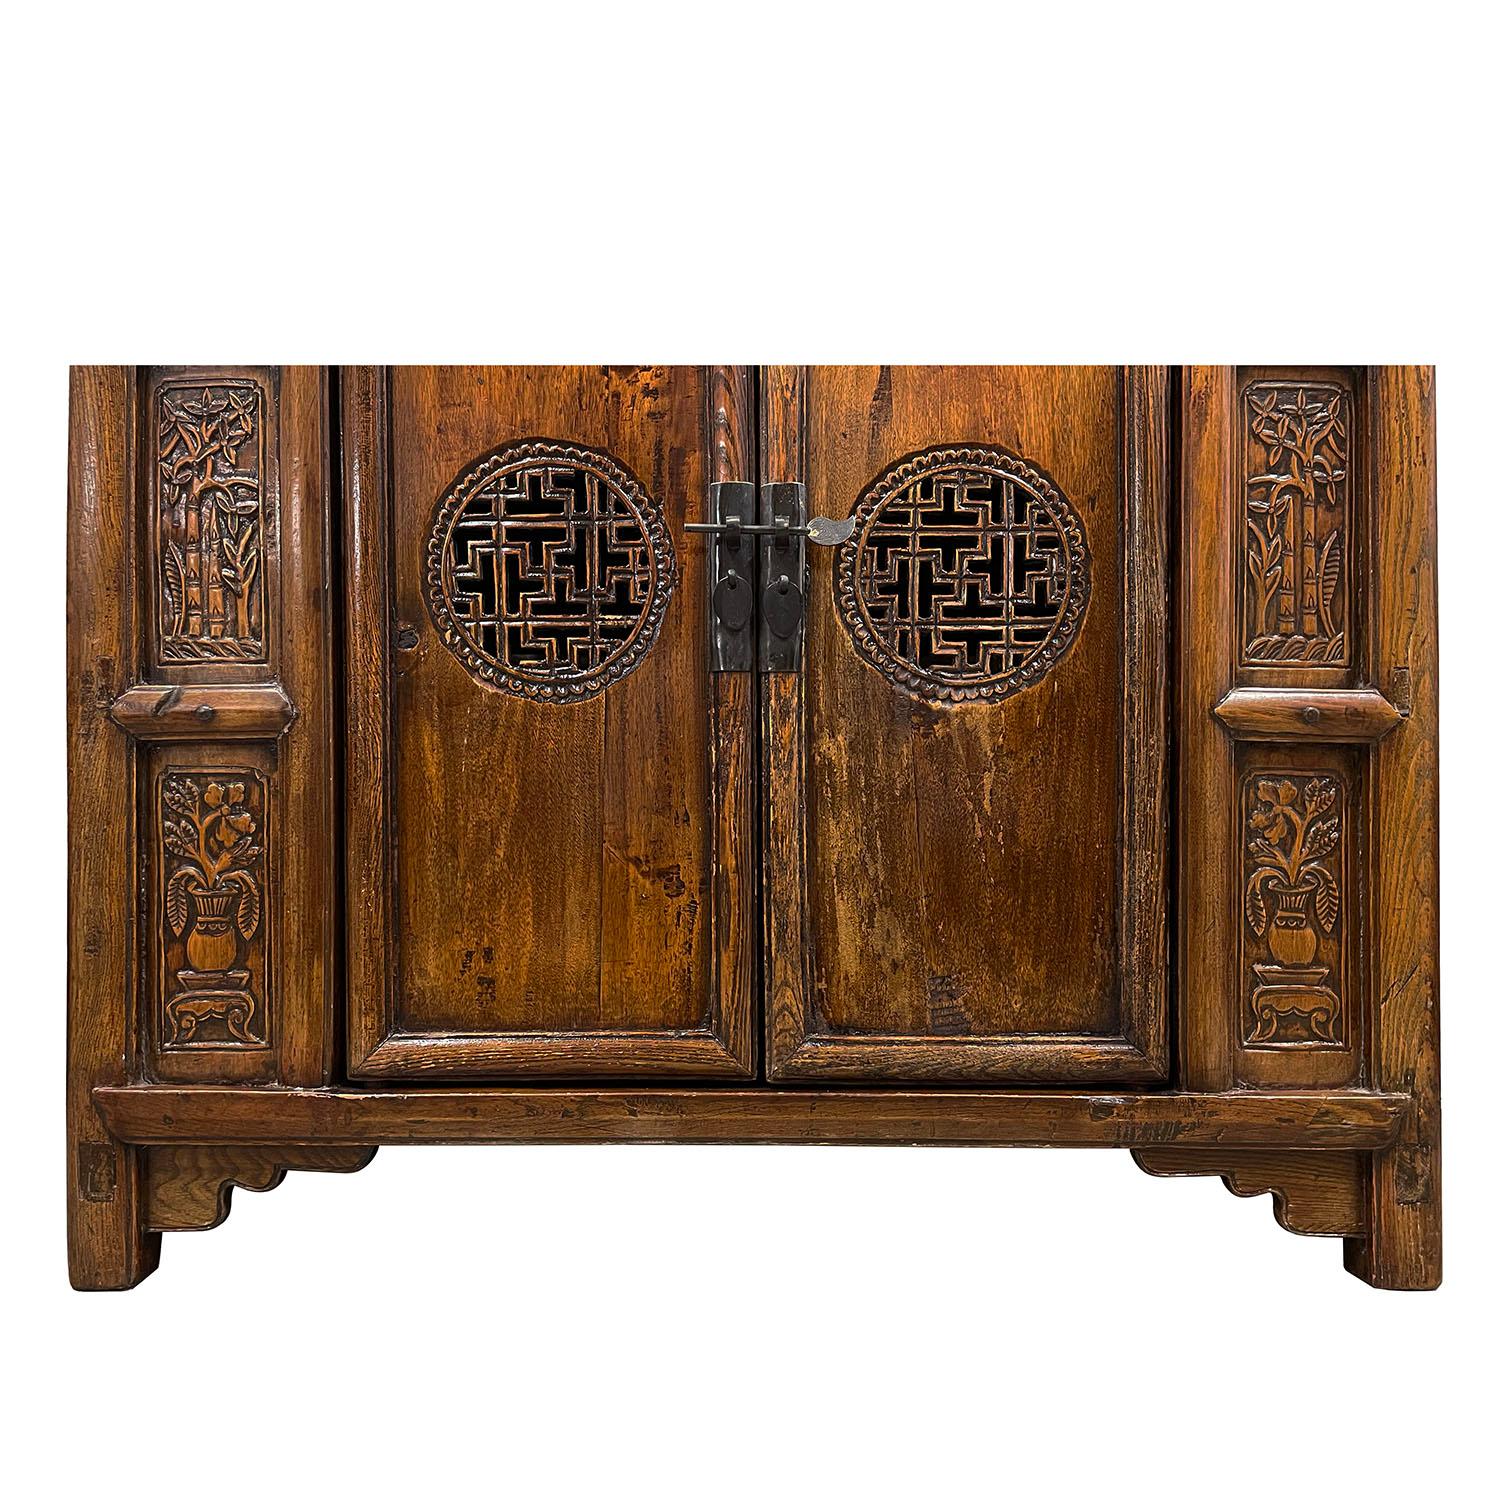 19th Century Antique Chinese Carved Coffer, Cabinet, Side Table In Distressed Condition For Sale In Pomona, CA